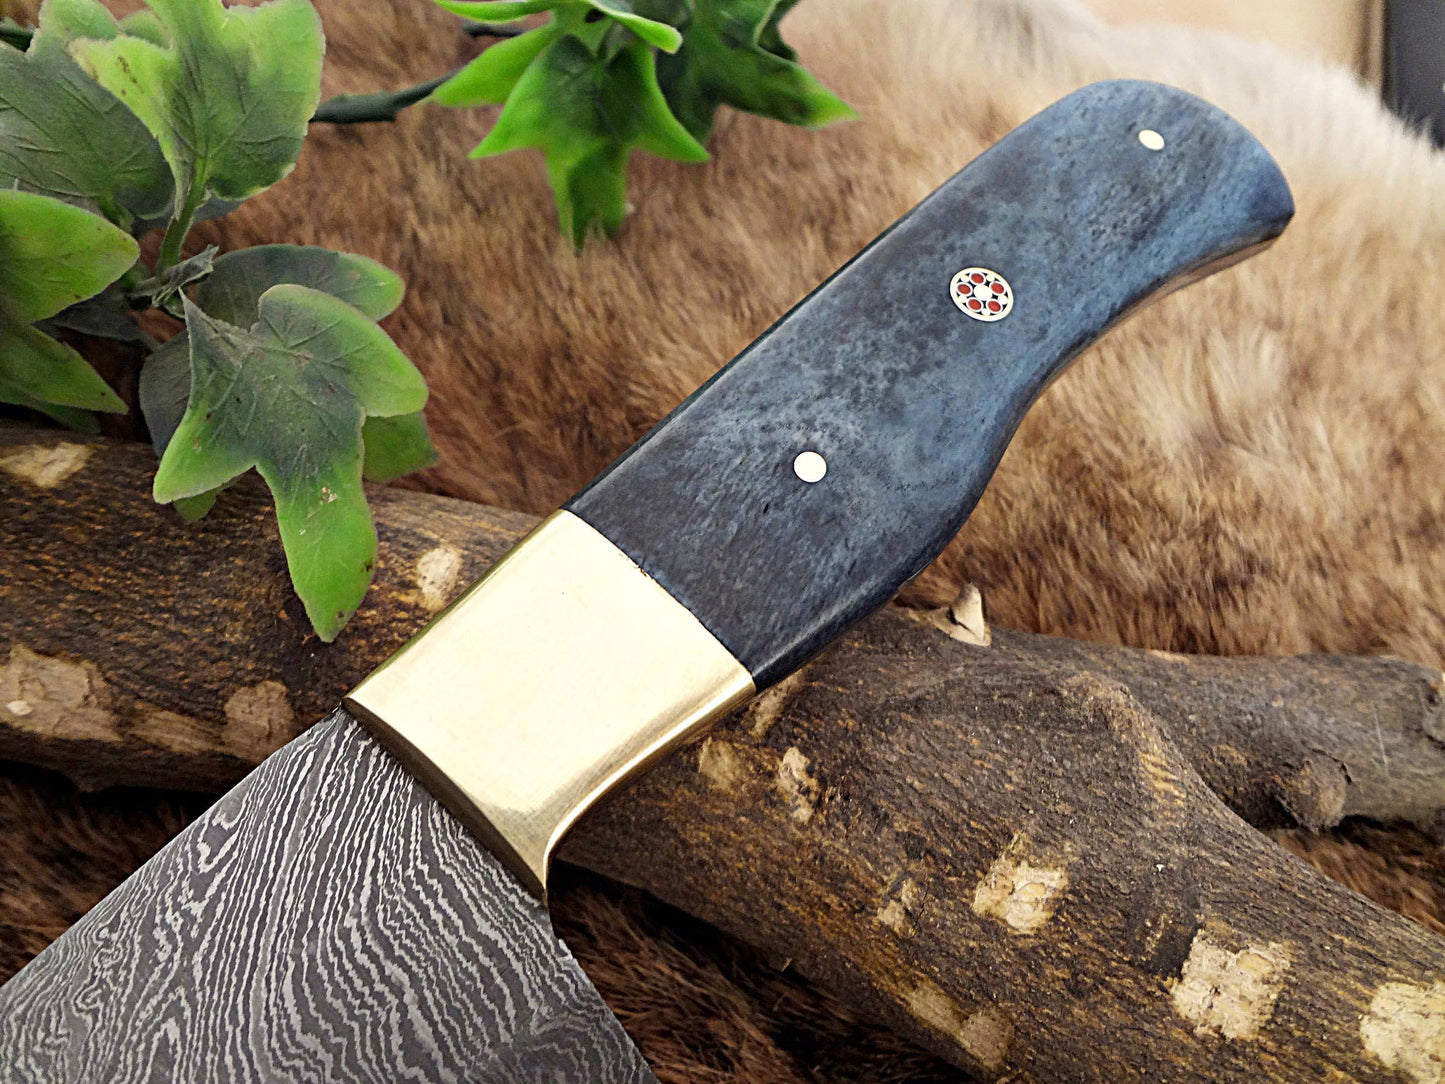 Damascus Steel kitchen Knife 14 Inches full tang 9" long Hand Forged blade, Blue Colored camel bone and brass bolster scale